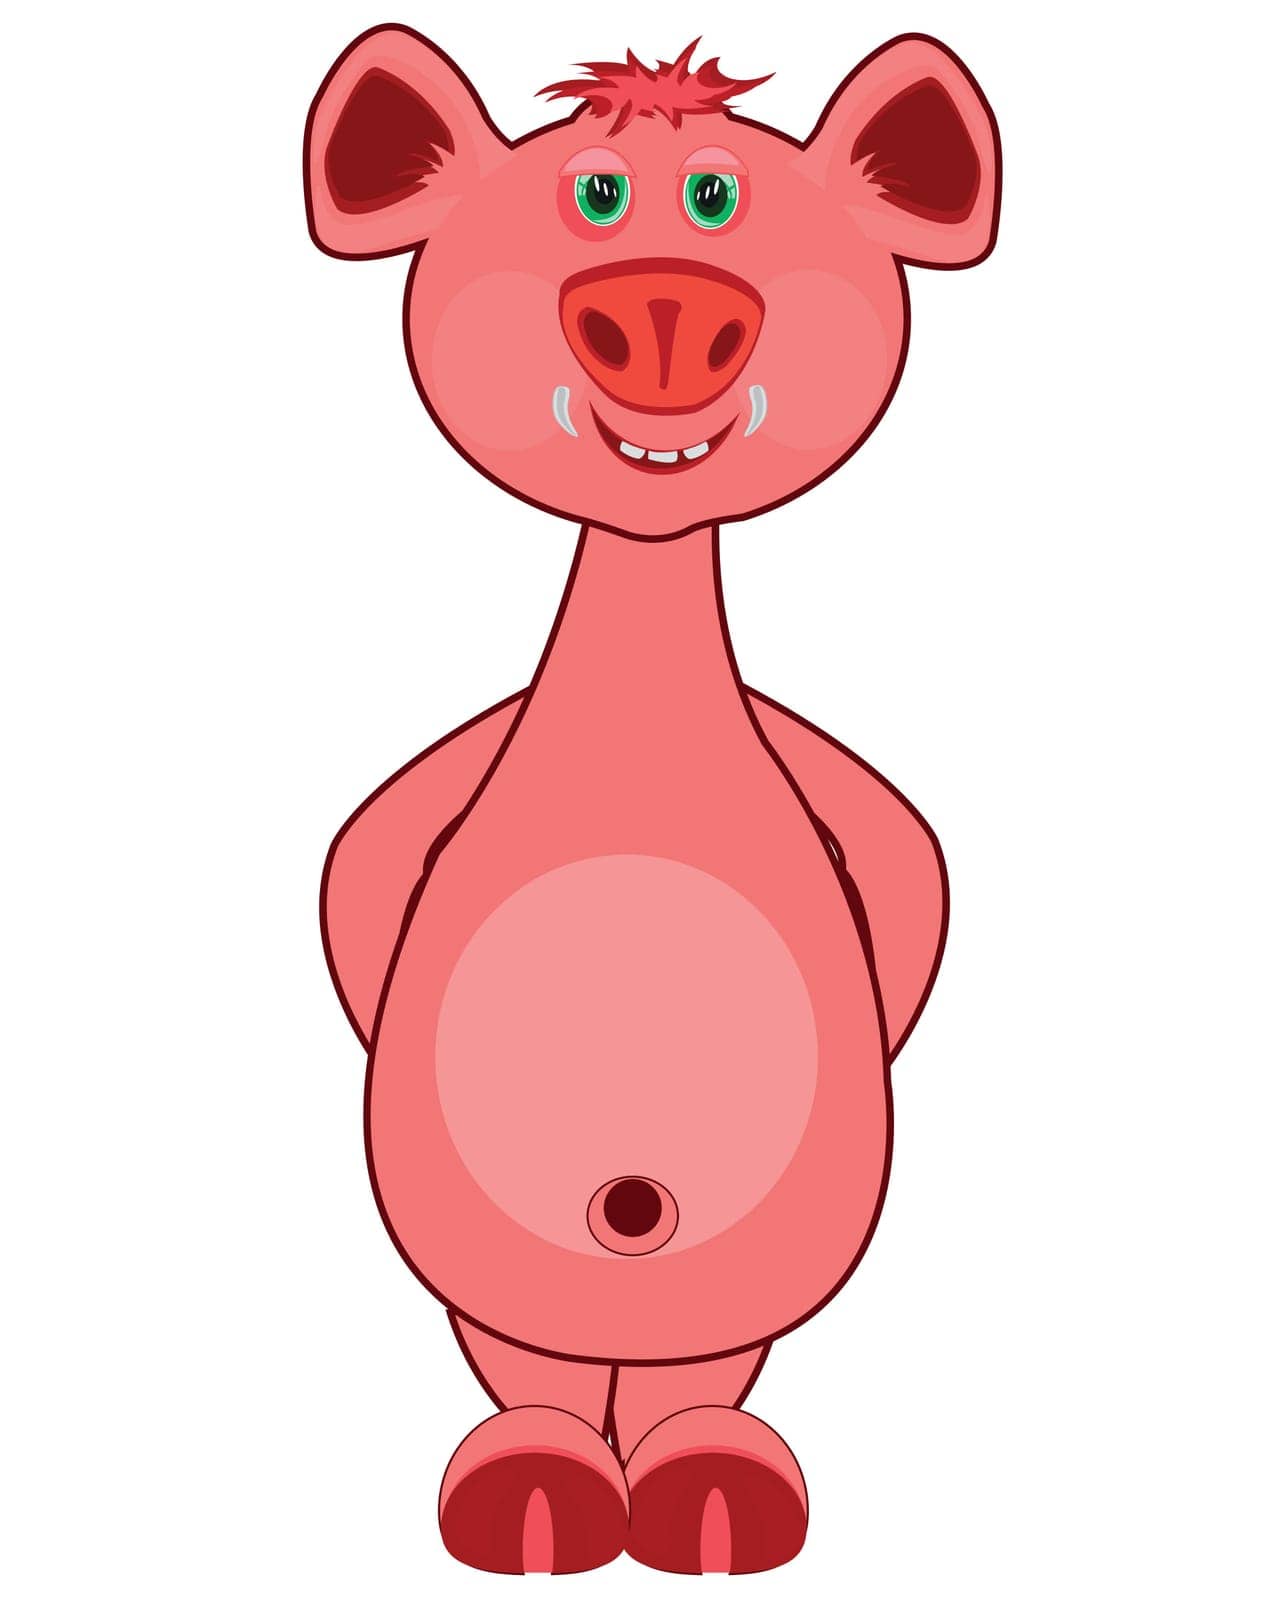 Home animal funny fairy-tale piglet baby drawing